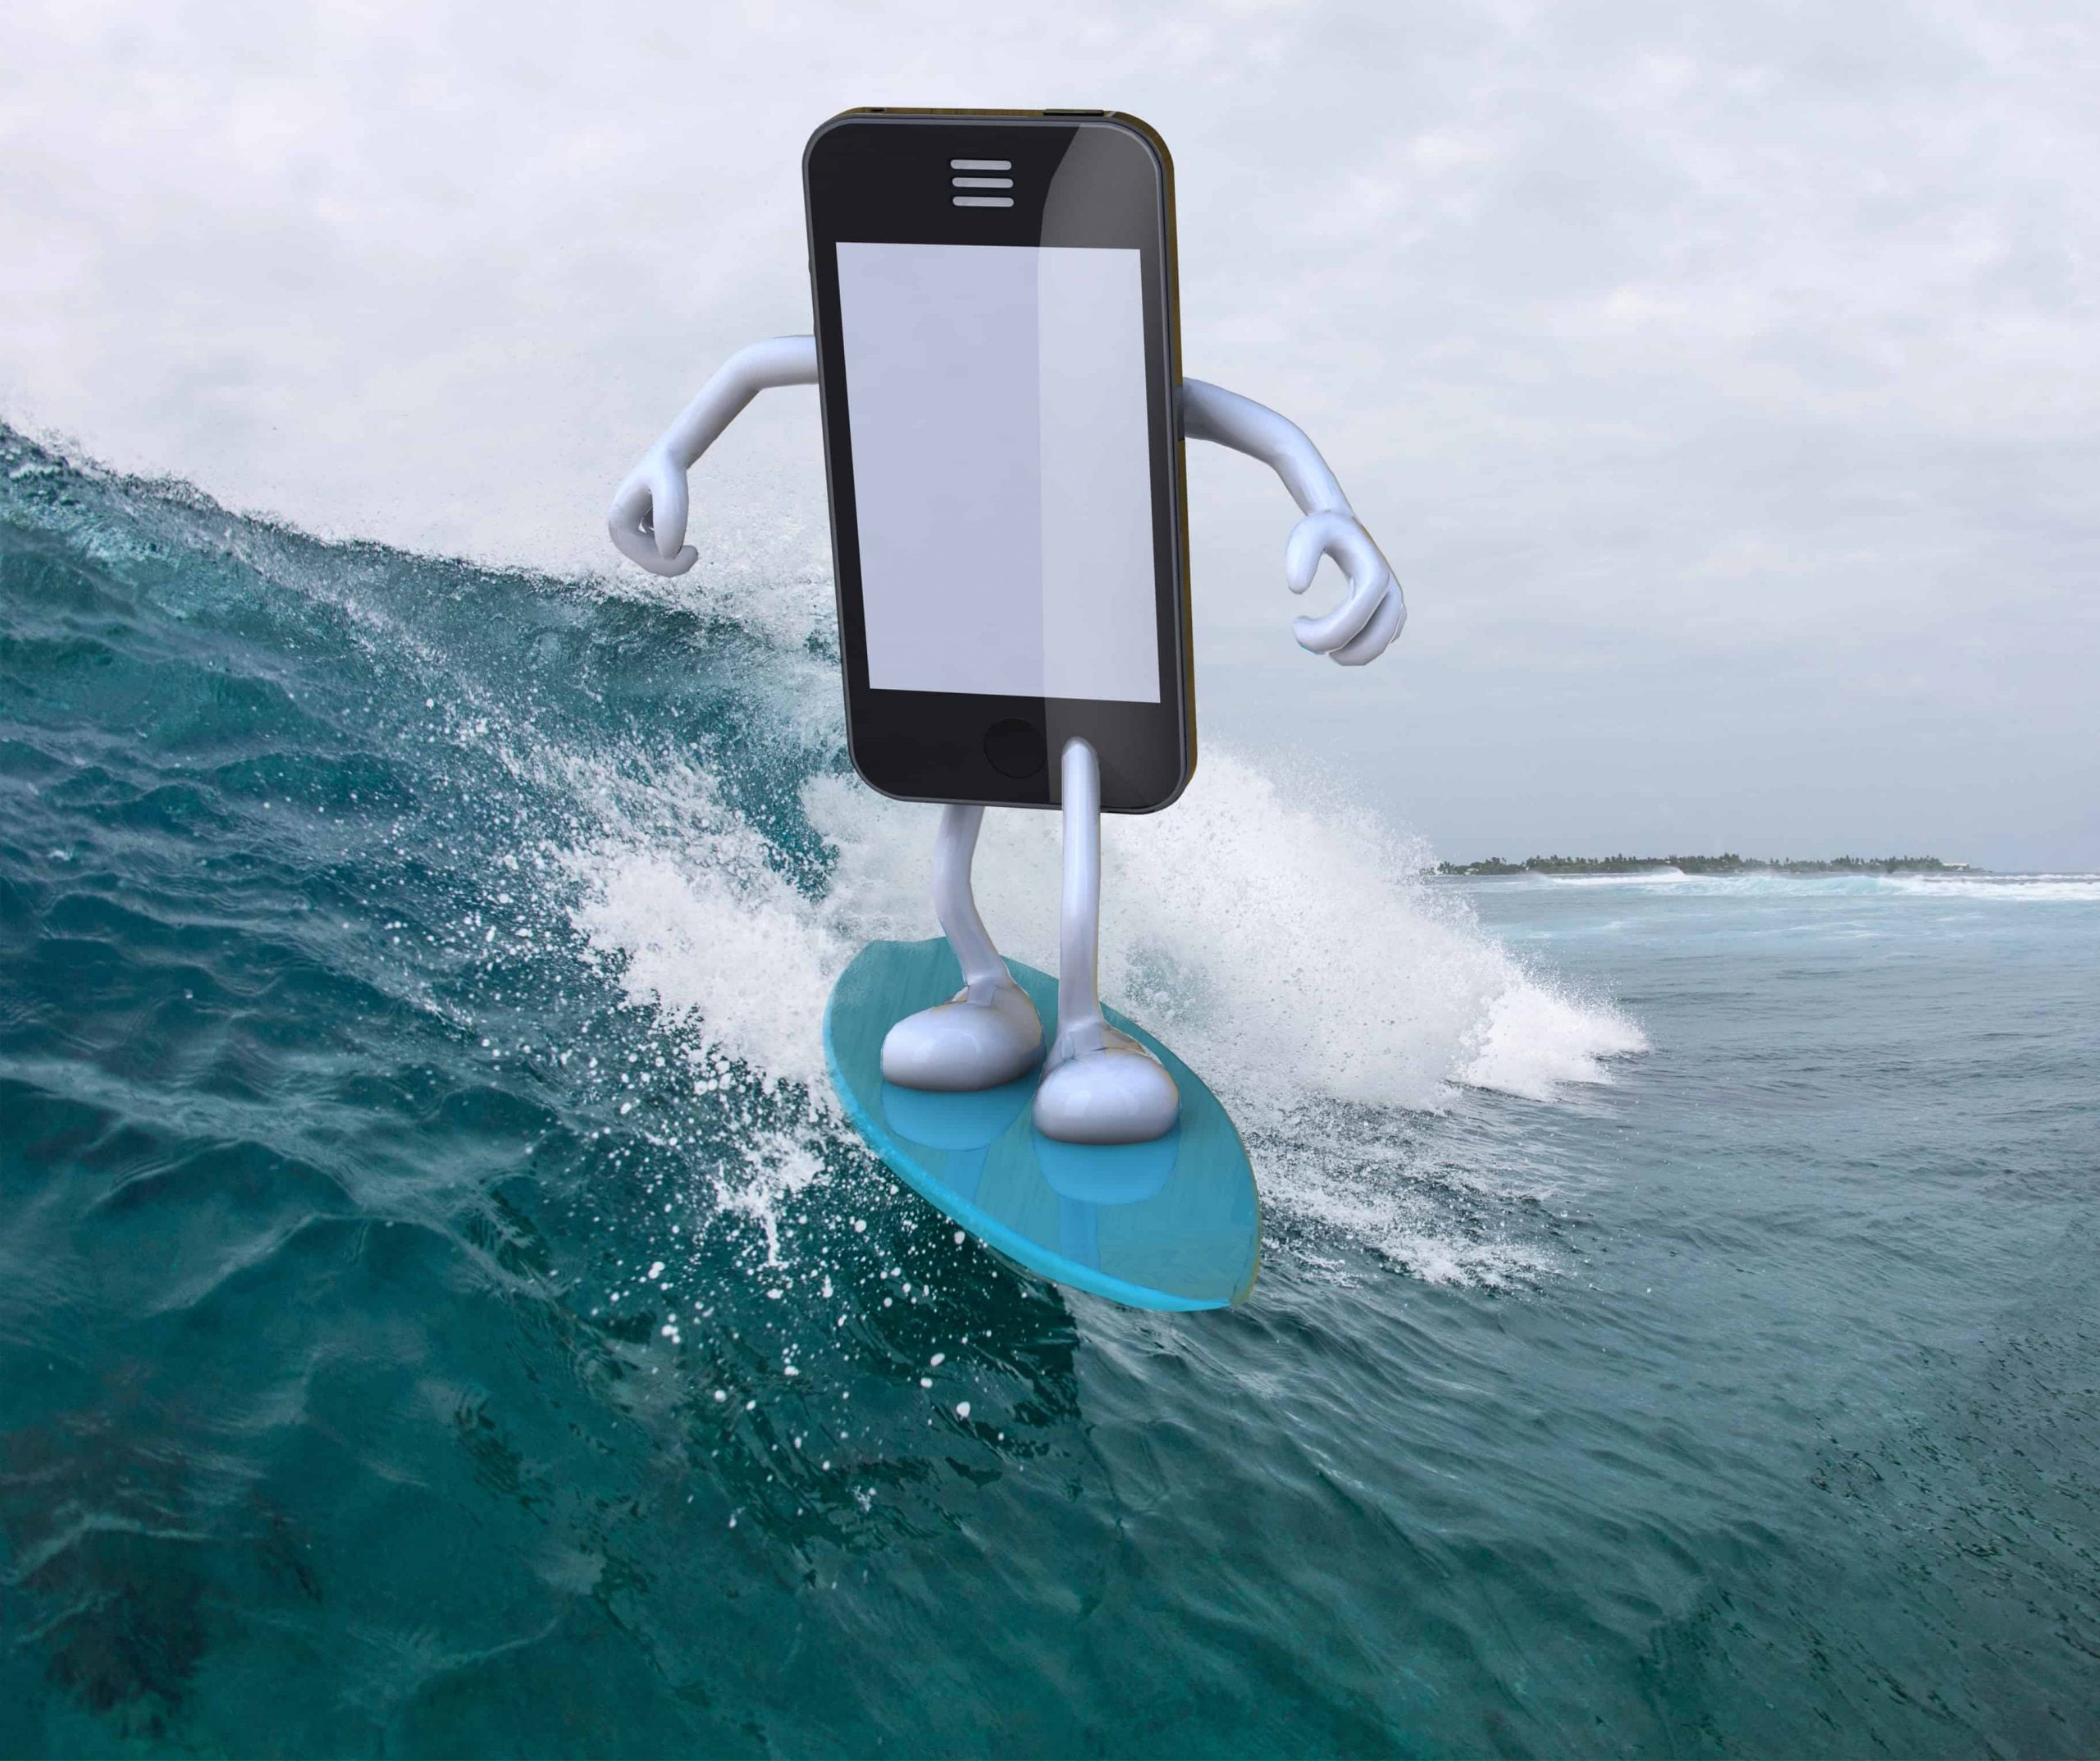 what to do with a phone while surfing?(Helpful Examples)